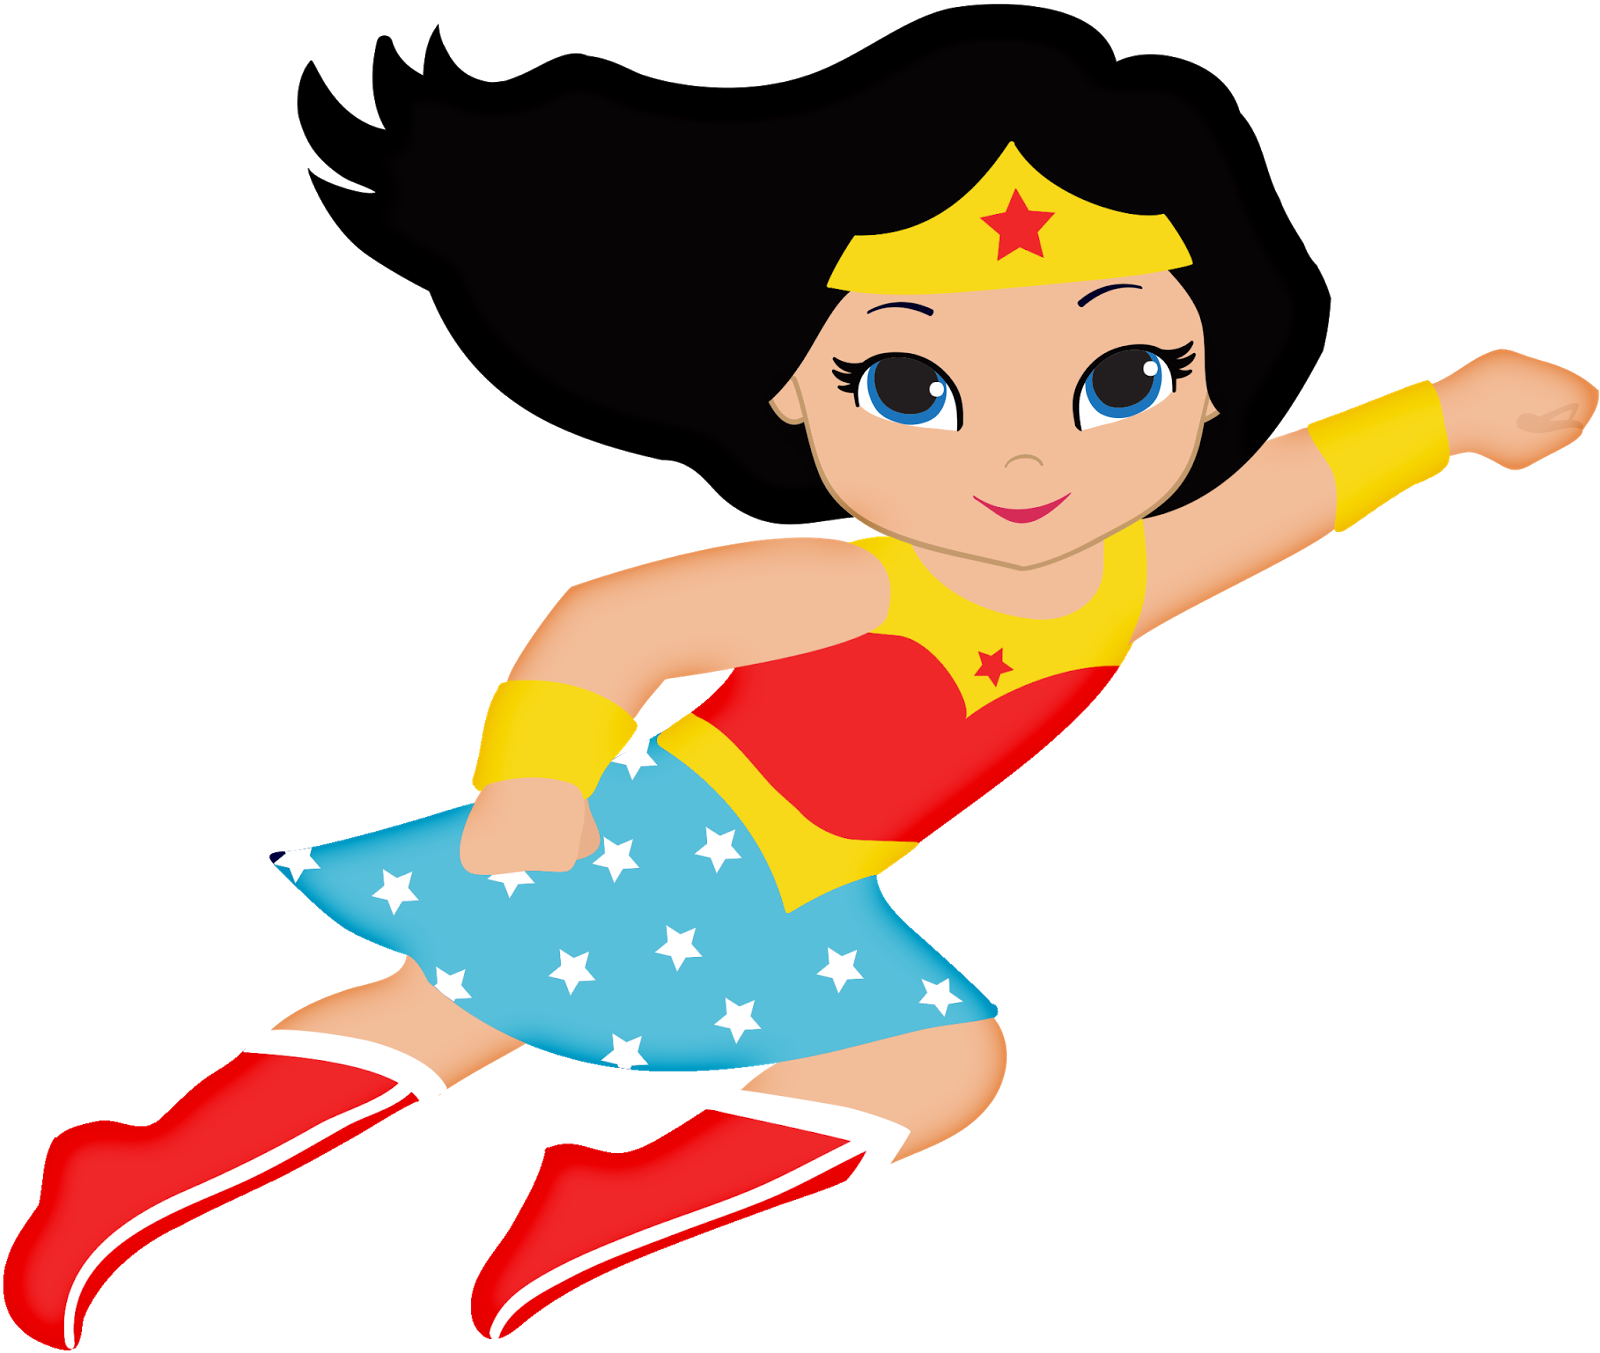 Wonder woman baby oh. Infant clipart bloody child